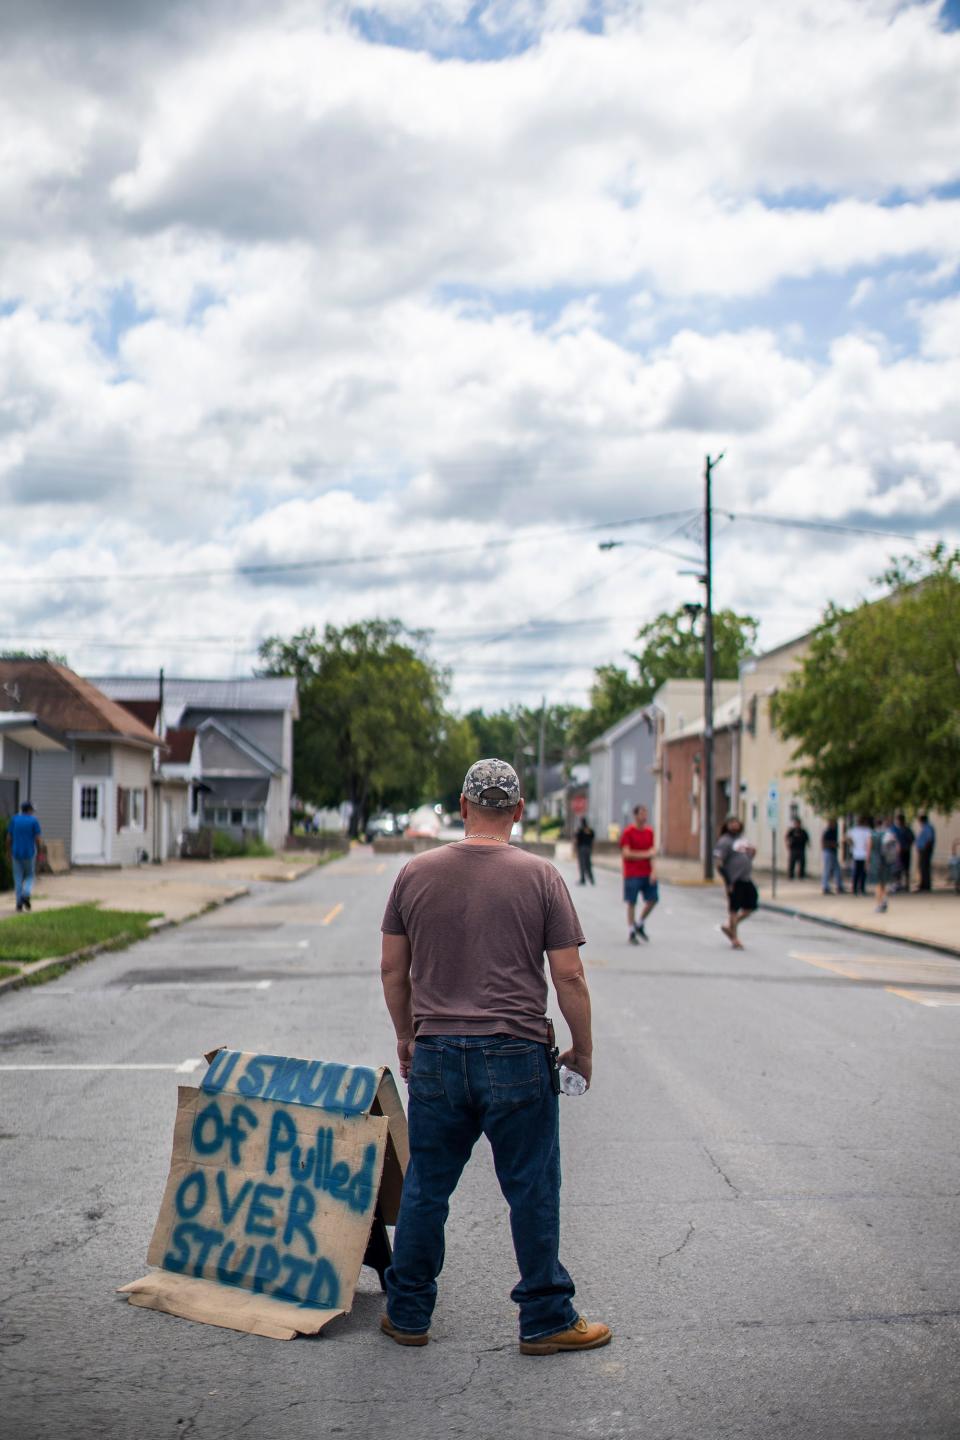 A local man, who refused to give his name, stands next to several hostile signs Saturday near a protest outside the Circleville Police Department in reaction to officer Ryan Speakman releasing his K-9 on an unarmed truck driver July 4. Only a handful of protesters showed up, and about twice as many locals came to watch.